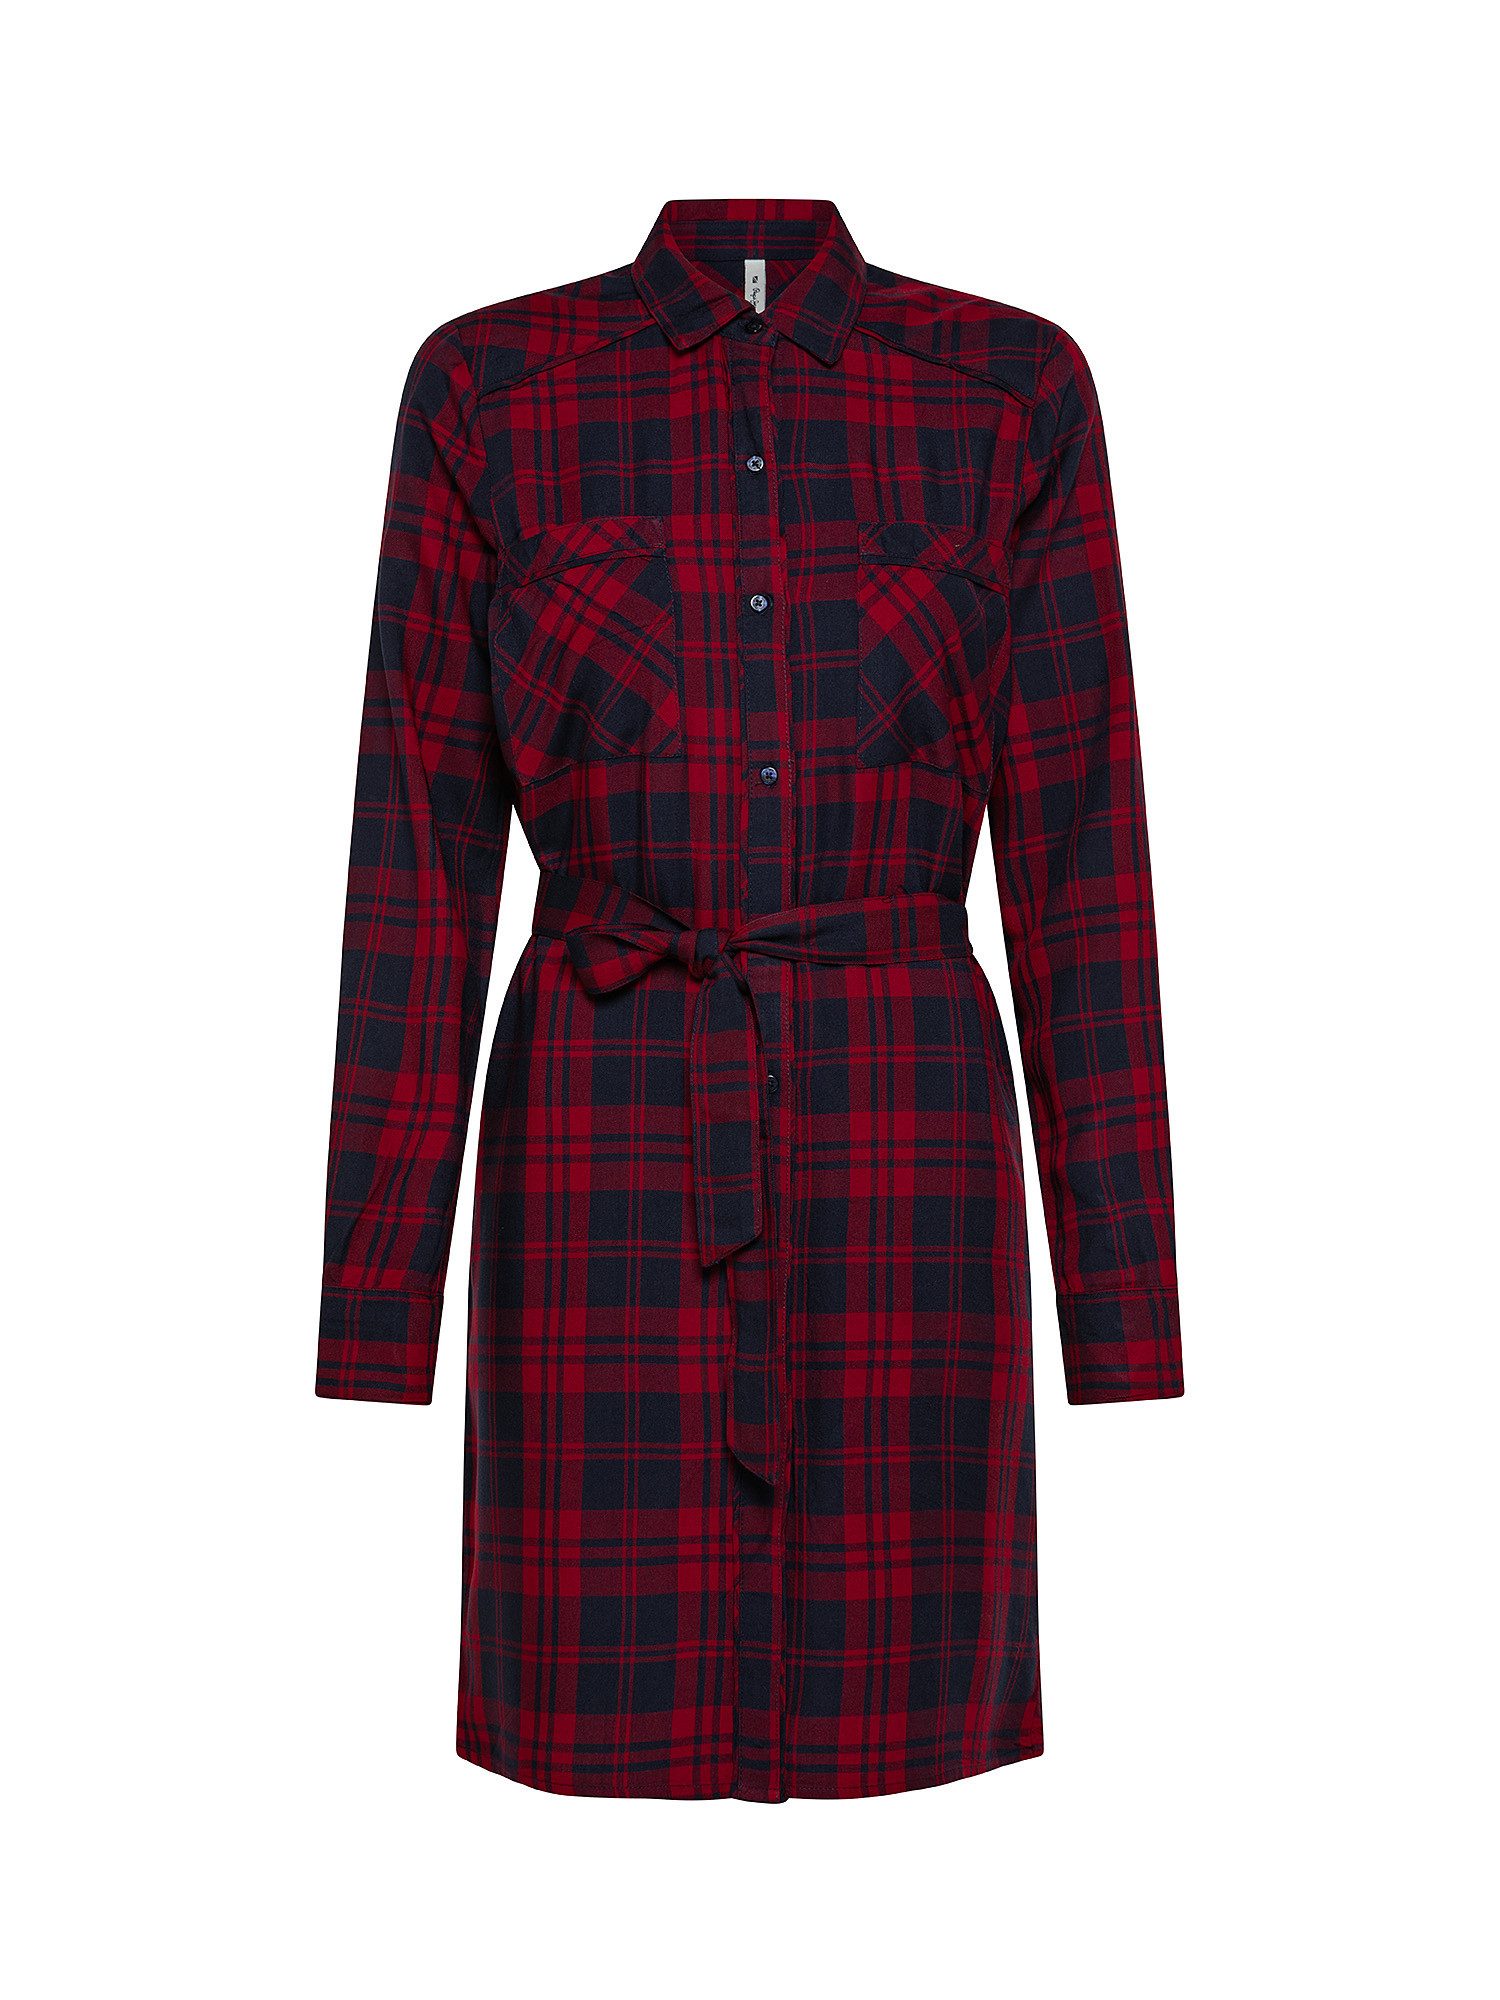 Oly shirt dress, Red, large image number 0